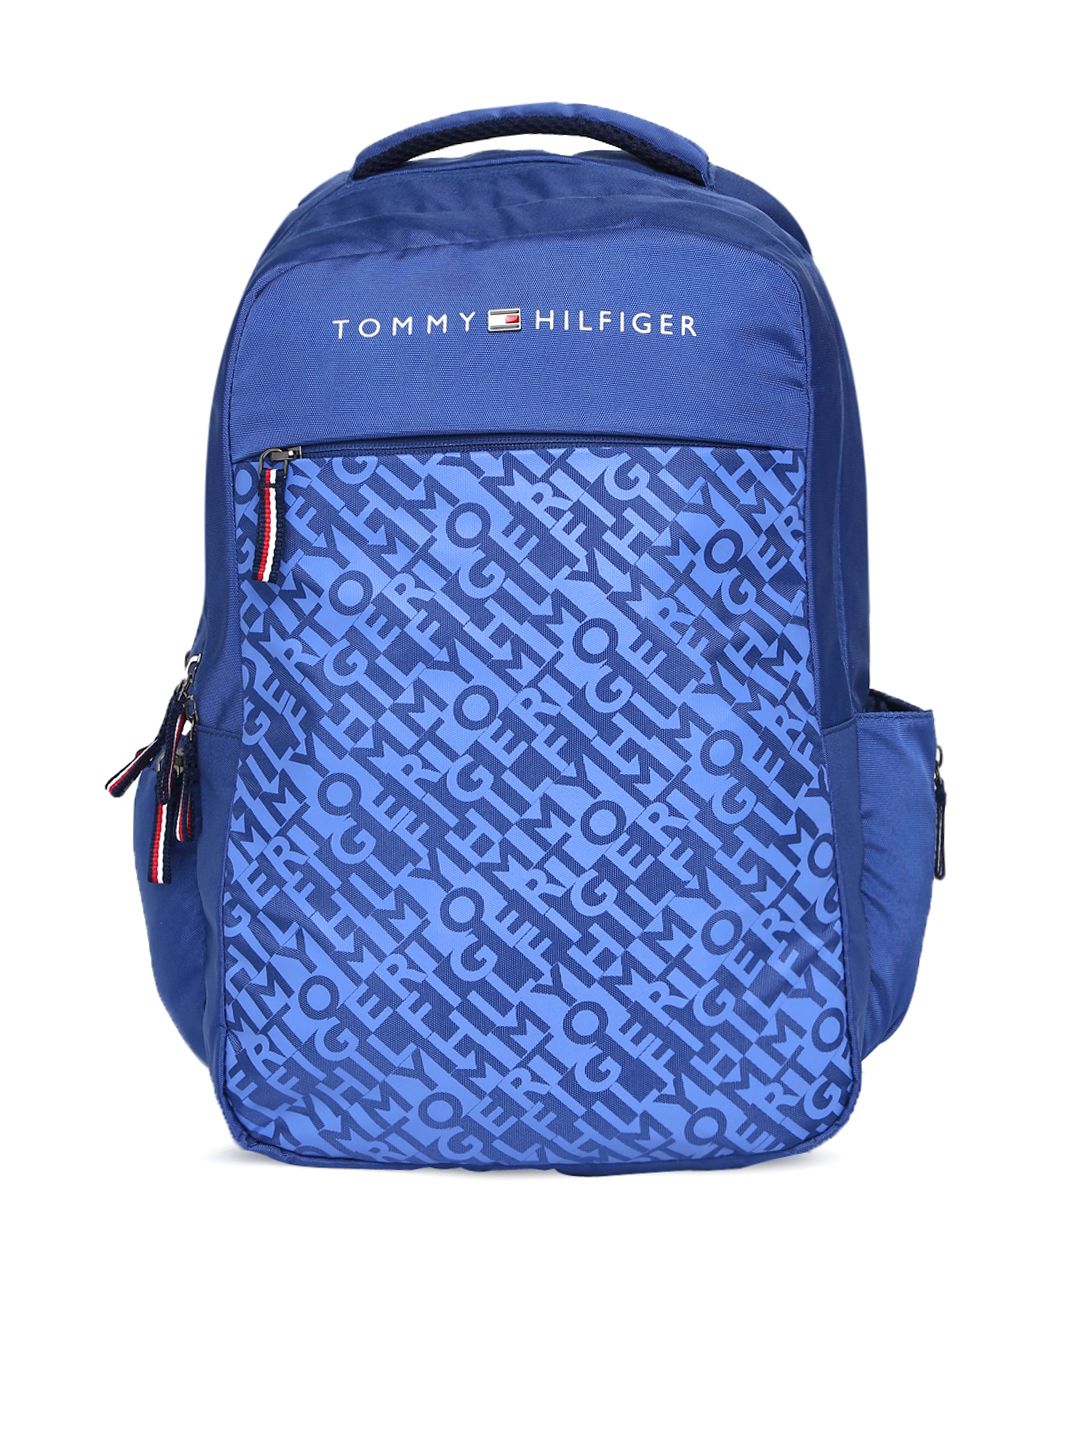 Tommy Hilfiger Unisex Navy Blue Printed Laptop Backpack Price in India